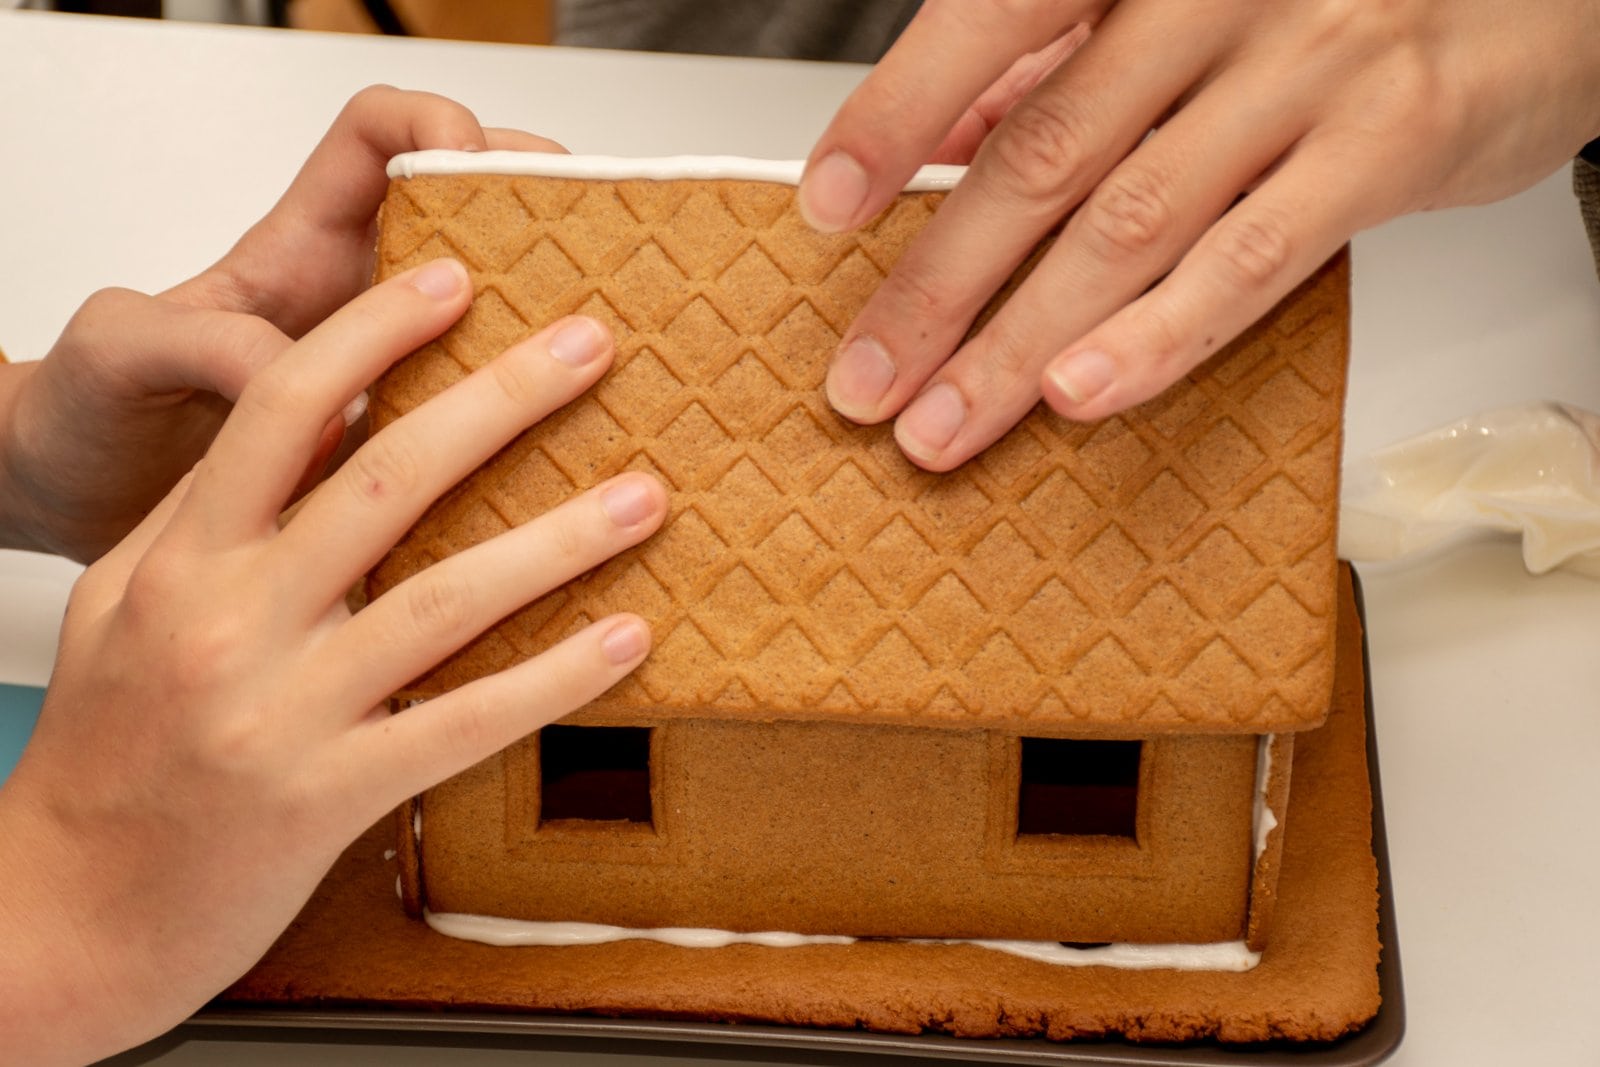 Assembling your gingerbread house